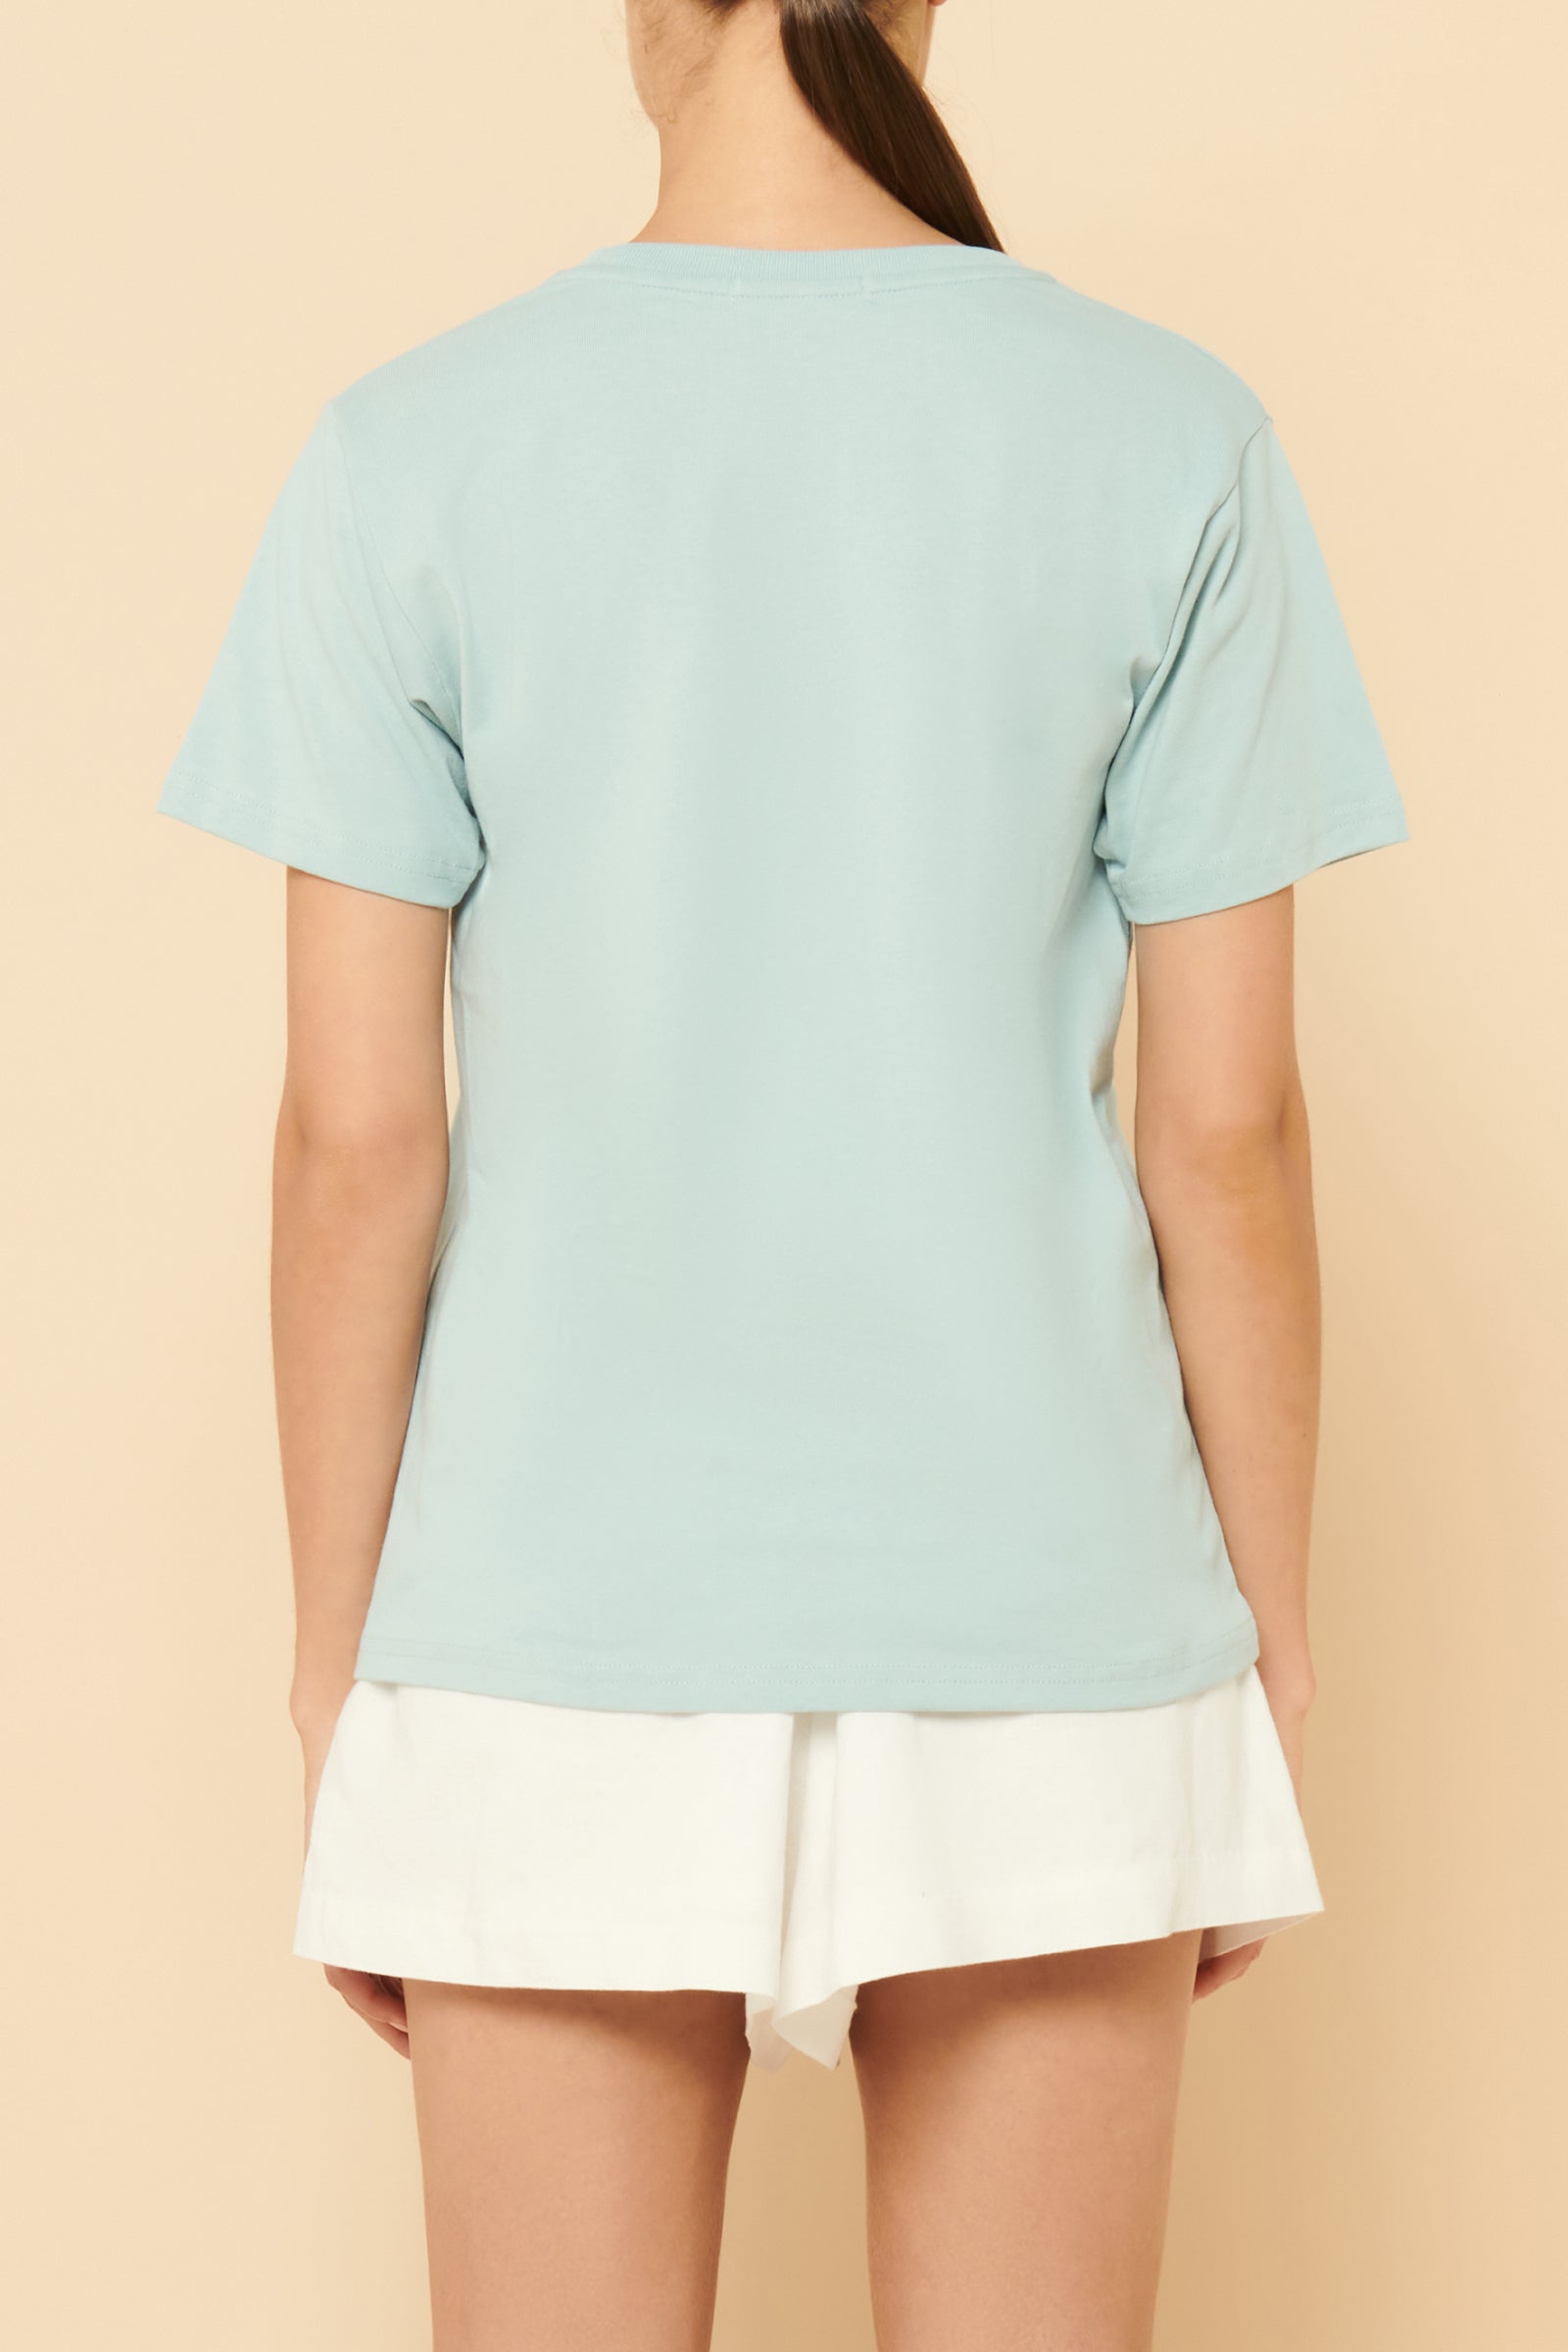 Nude Lucy Nude Organic Heritage Tee In A Blue Lagoon Colour 